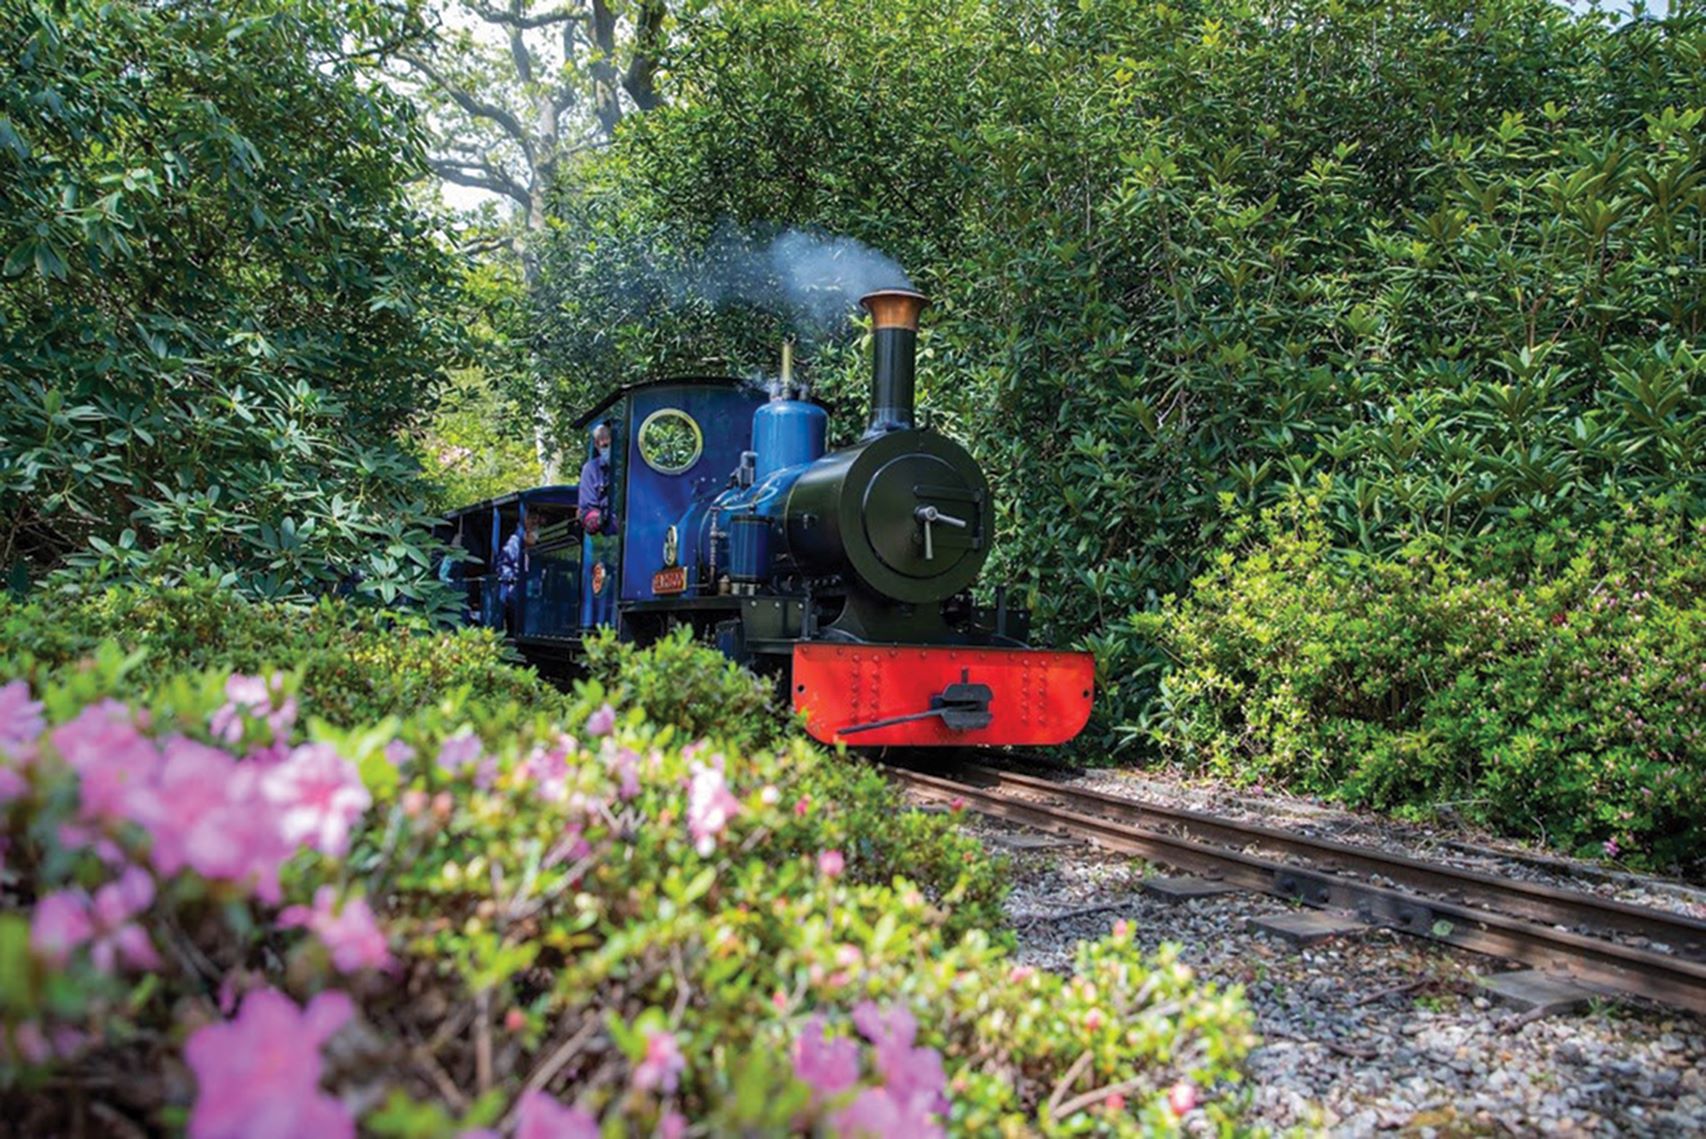 CRUISE & STEAM THROUGH THE NEW FOREST